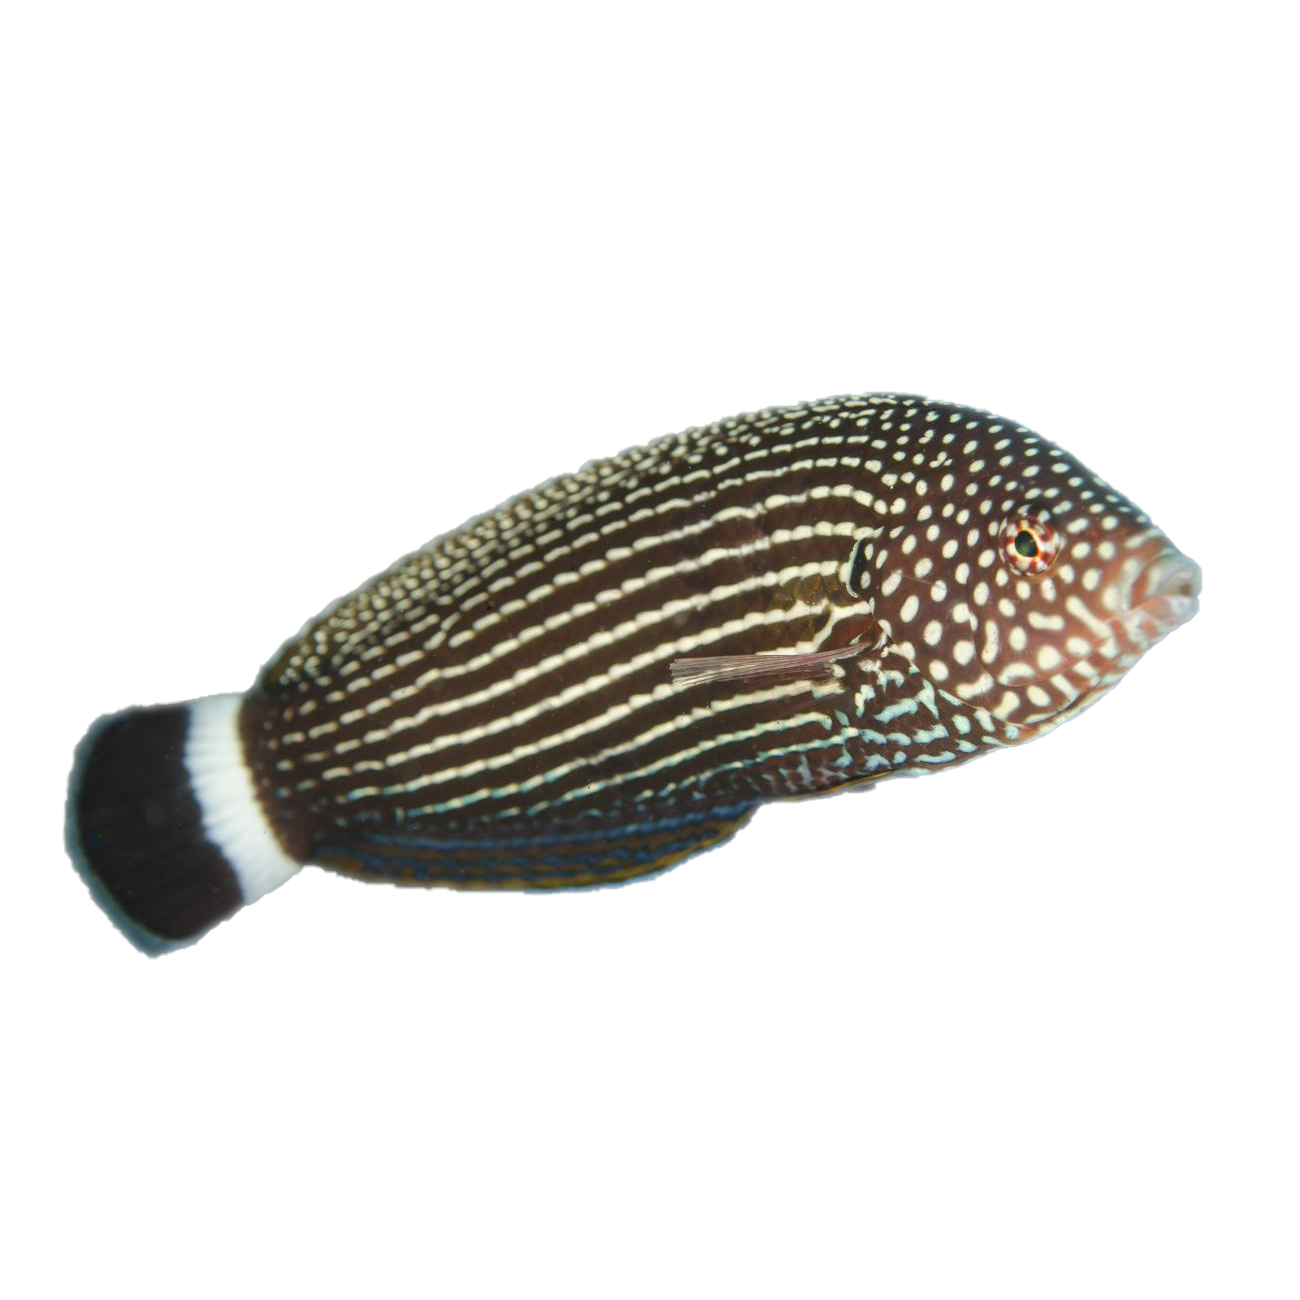 Lined Tamarin Wrasse